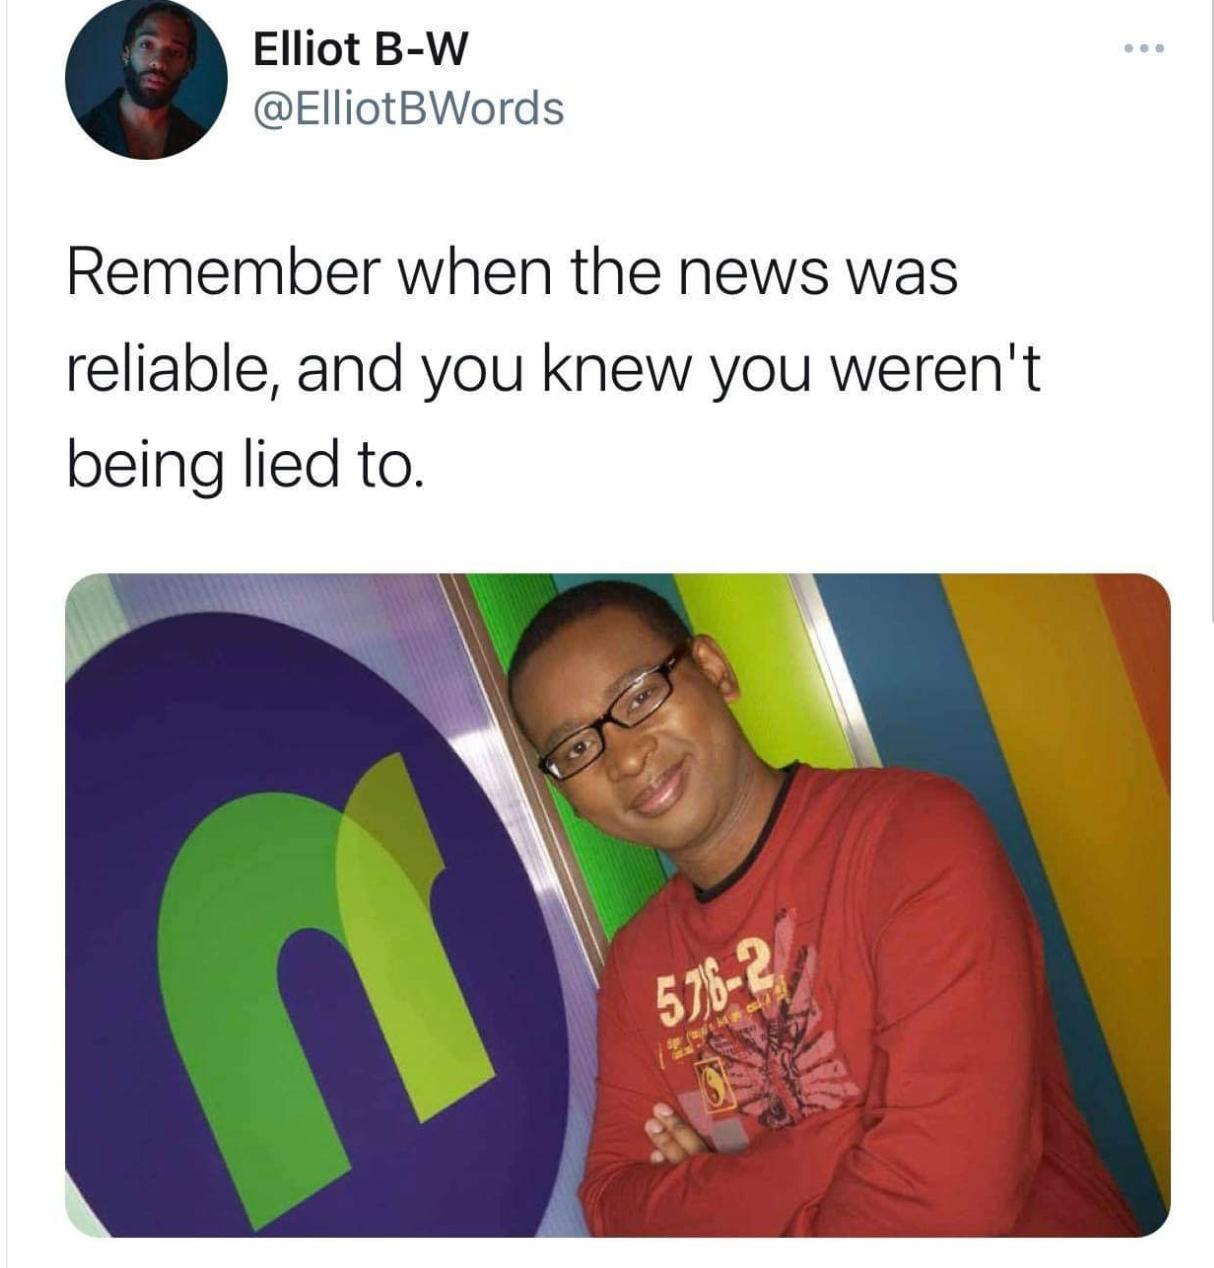 media - Elliot BW Remember when the news was reliable, and you knew you weren't being lied to. 5762